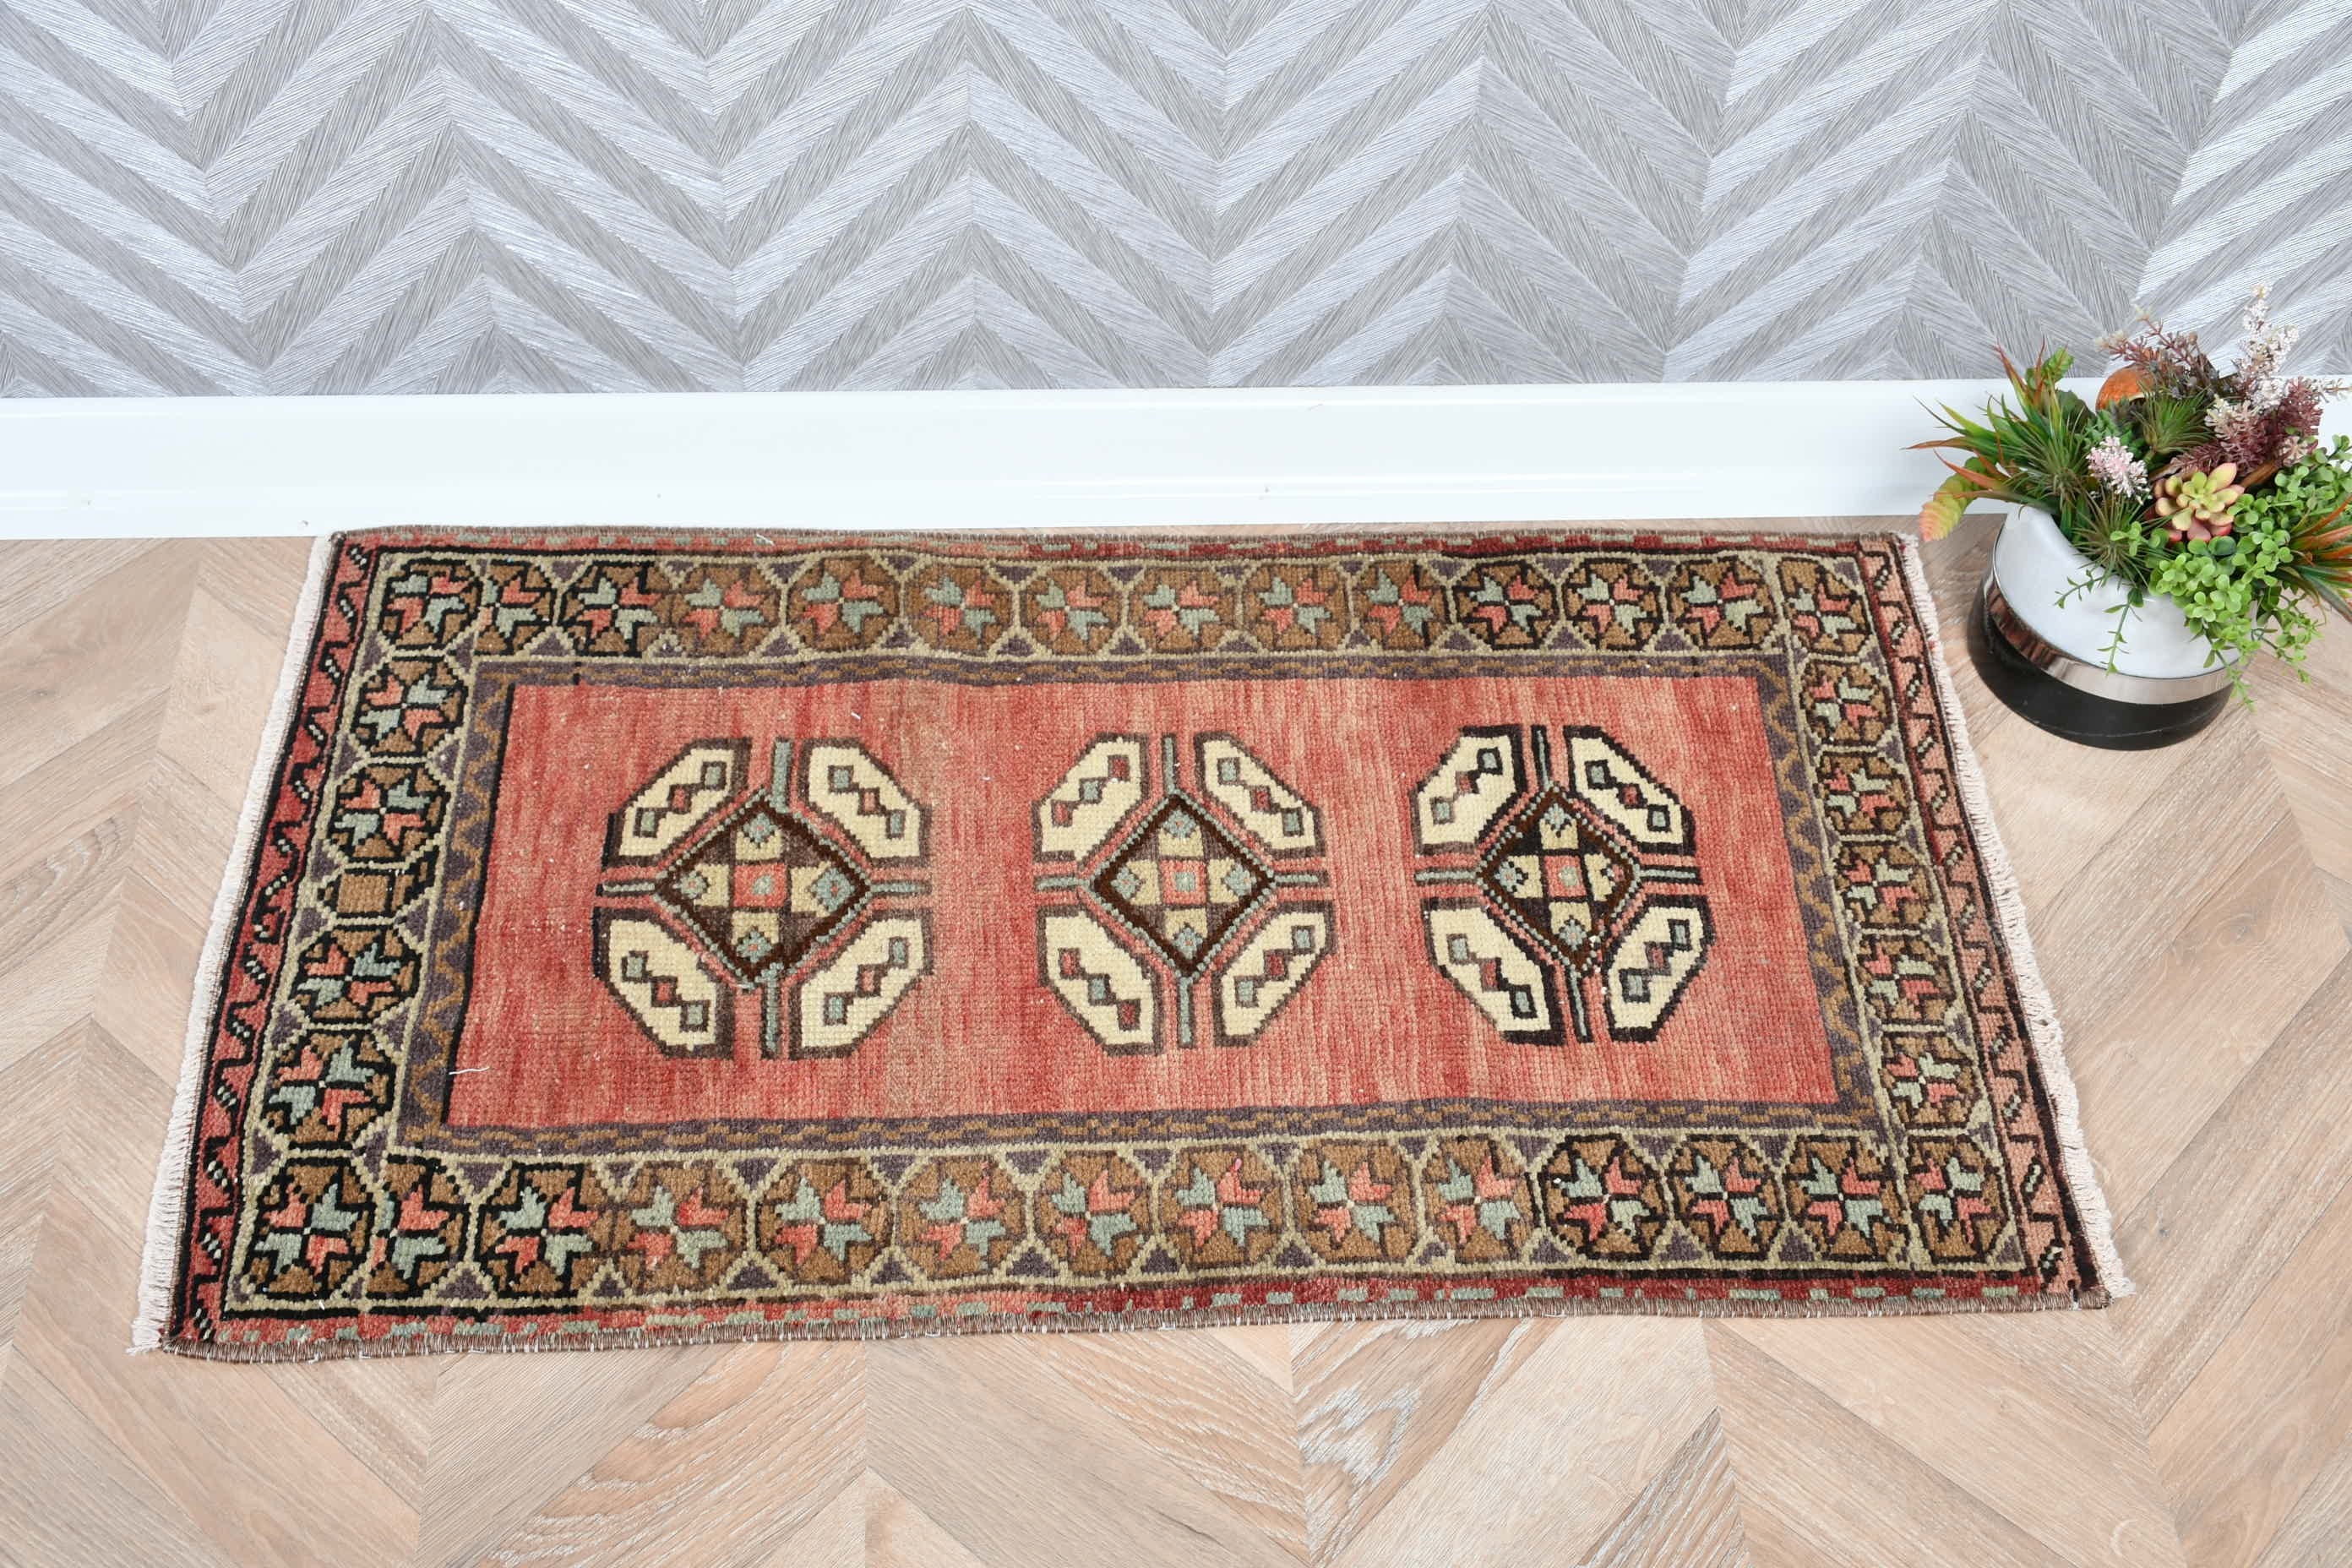 Vintage Rug, 2x3 ft Small Rugs, Turkish Rugs, Red Kitchen Rug, Antique Rug, Car Mat Rug, Rugs for Kitchen, Bedroom Rug